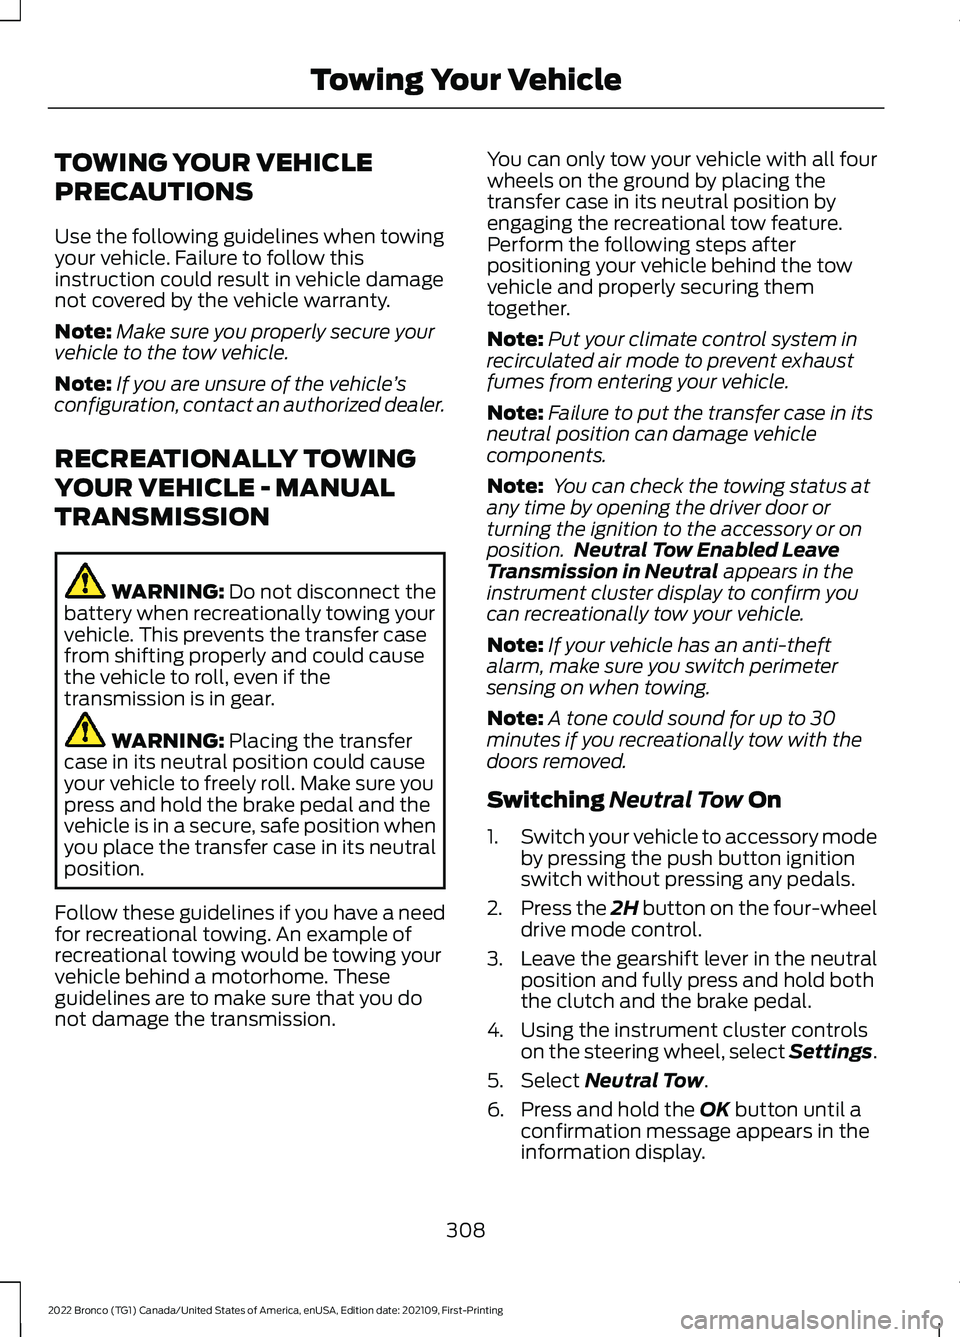 FORD BRONCO 2022 Owners Guide TOWING YOUR VEHICLE
PRECAUTIONS
Use the following guidelines when towingyour vehicle. Failure to follow thisinstruction could result in vehicle damagenot covered by the vehicle warranty.
Note:Make sur